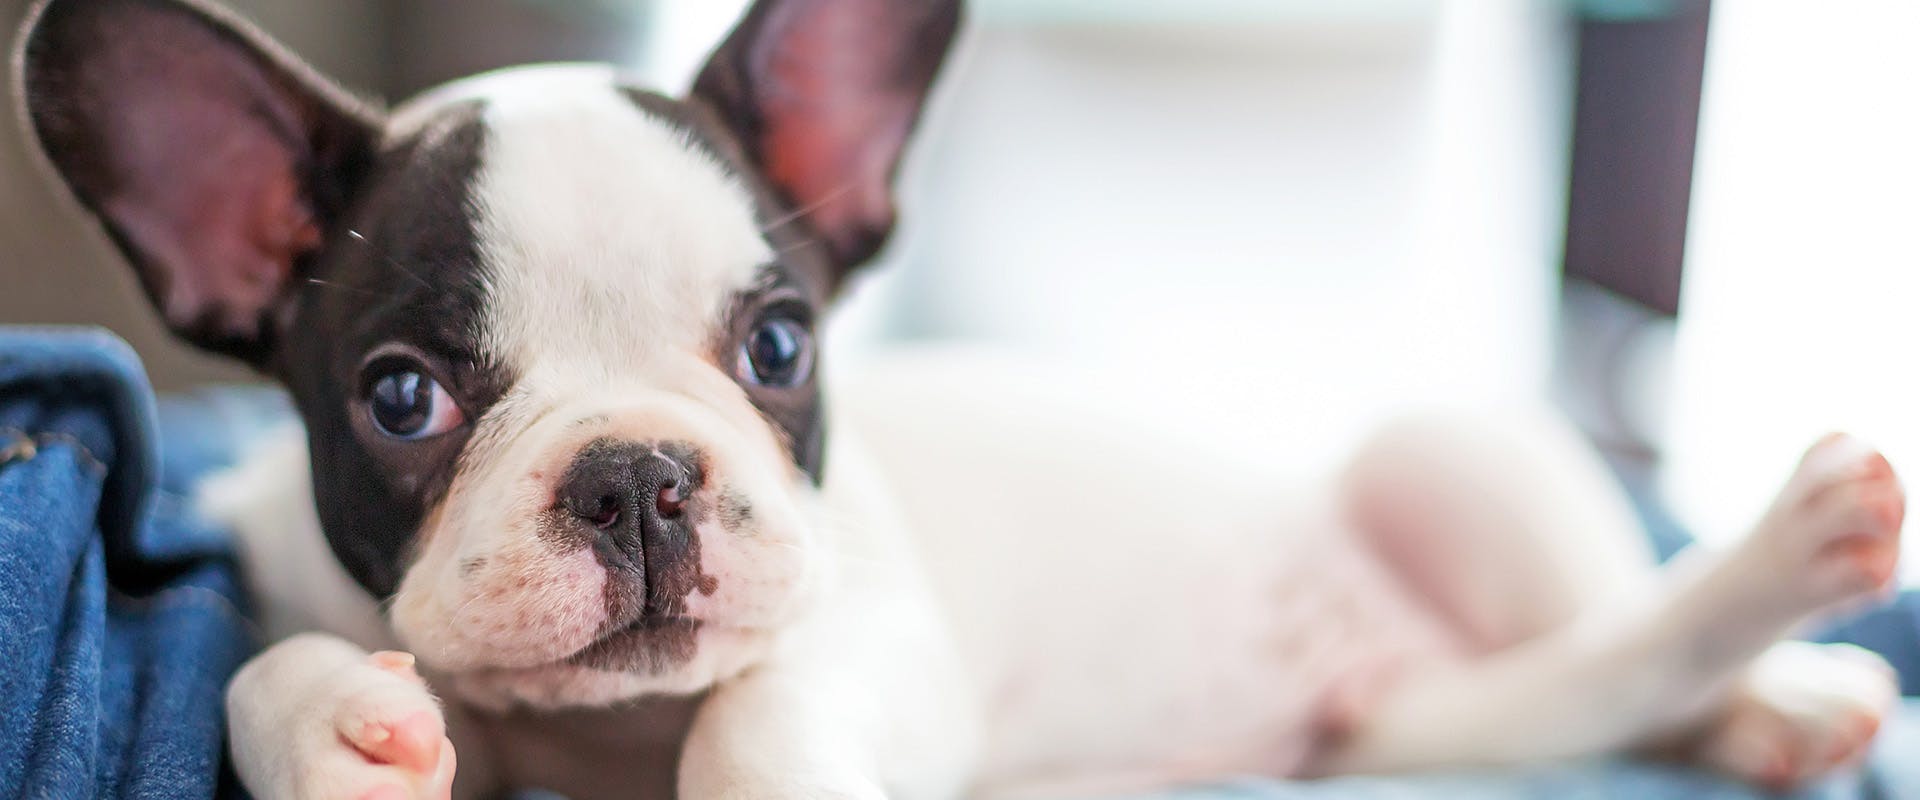 A cute black and white French Bulldog puppy